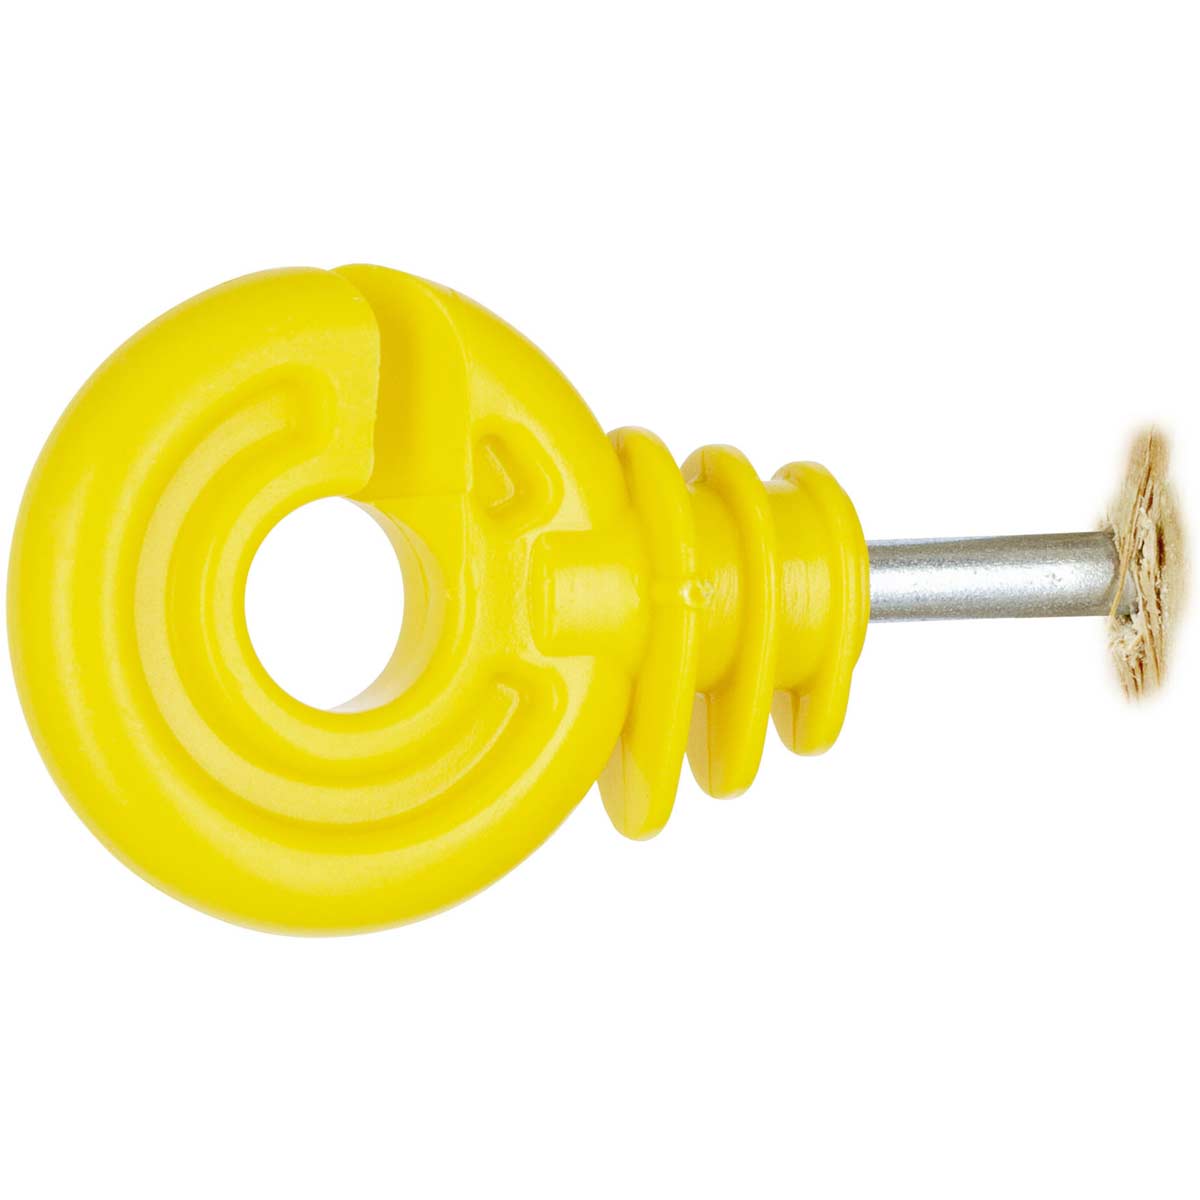 25x Isolateur annulaire compact AKO jaune court support 5 mm